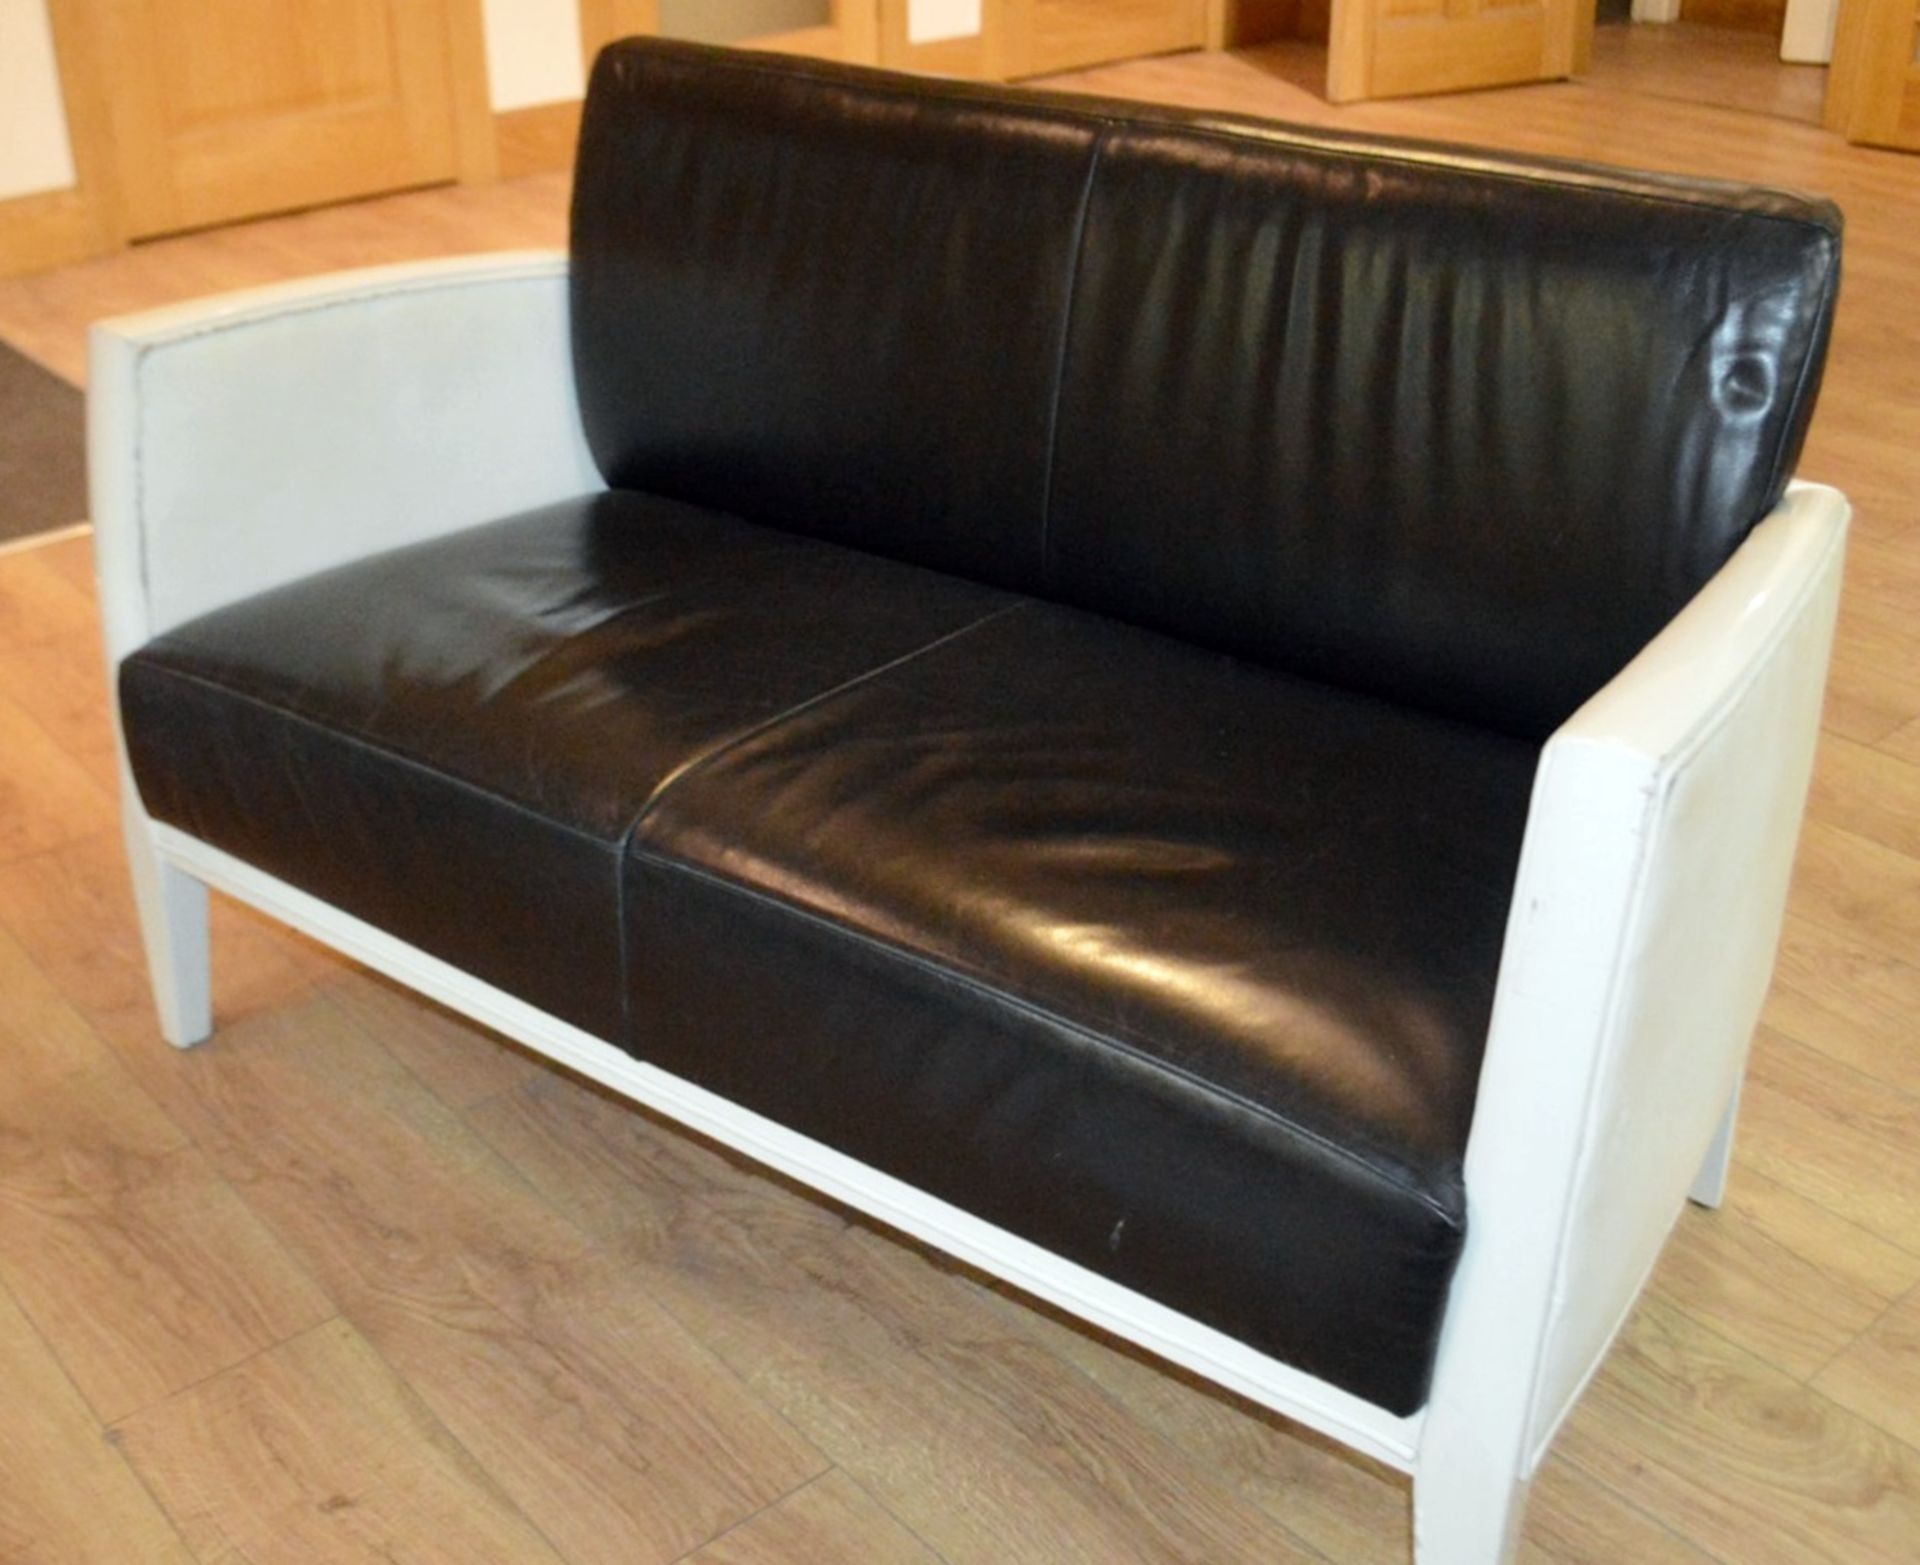 1 x Stylish Commercial Leather Upholstered 2-Seater Sofa With A High-Gloss Patent-Style Finish - Image 5 of 6